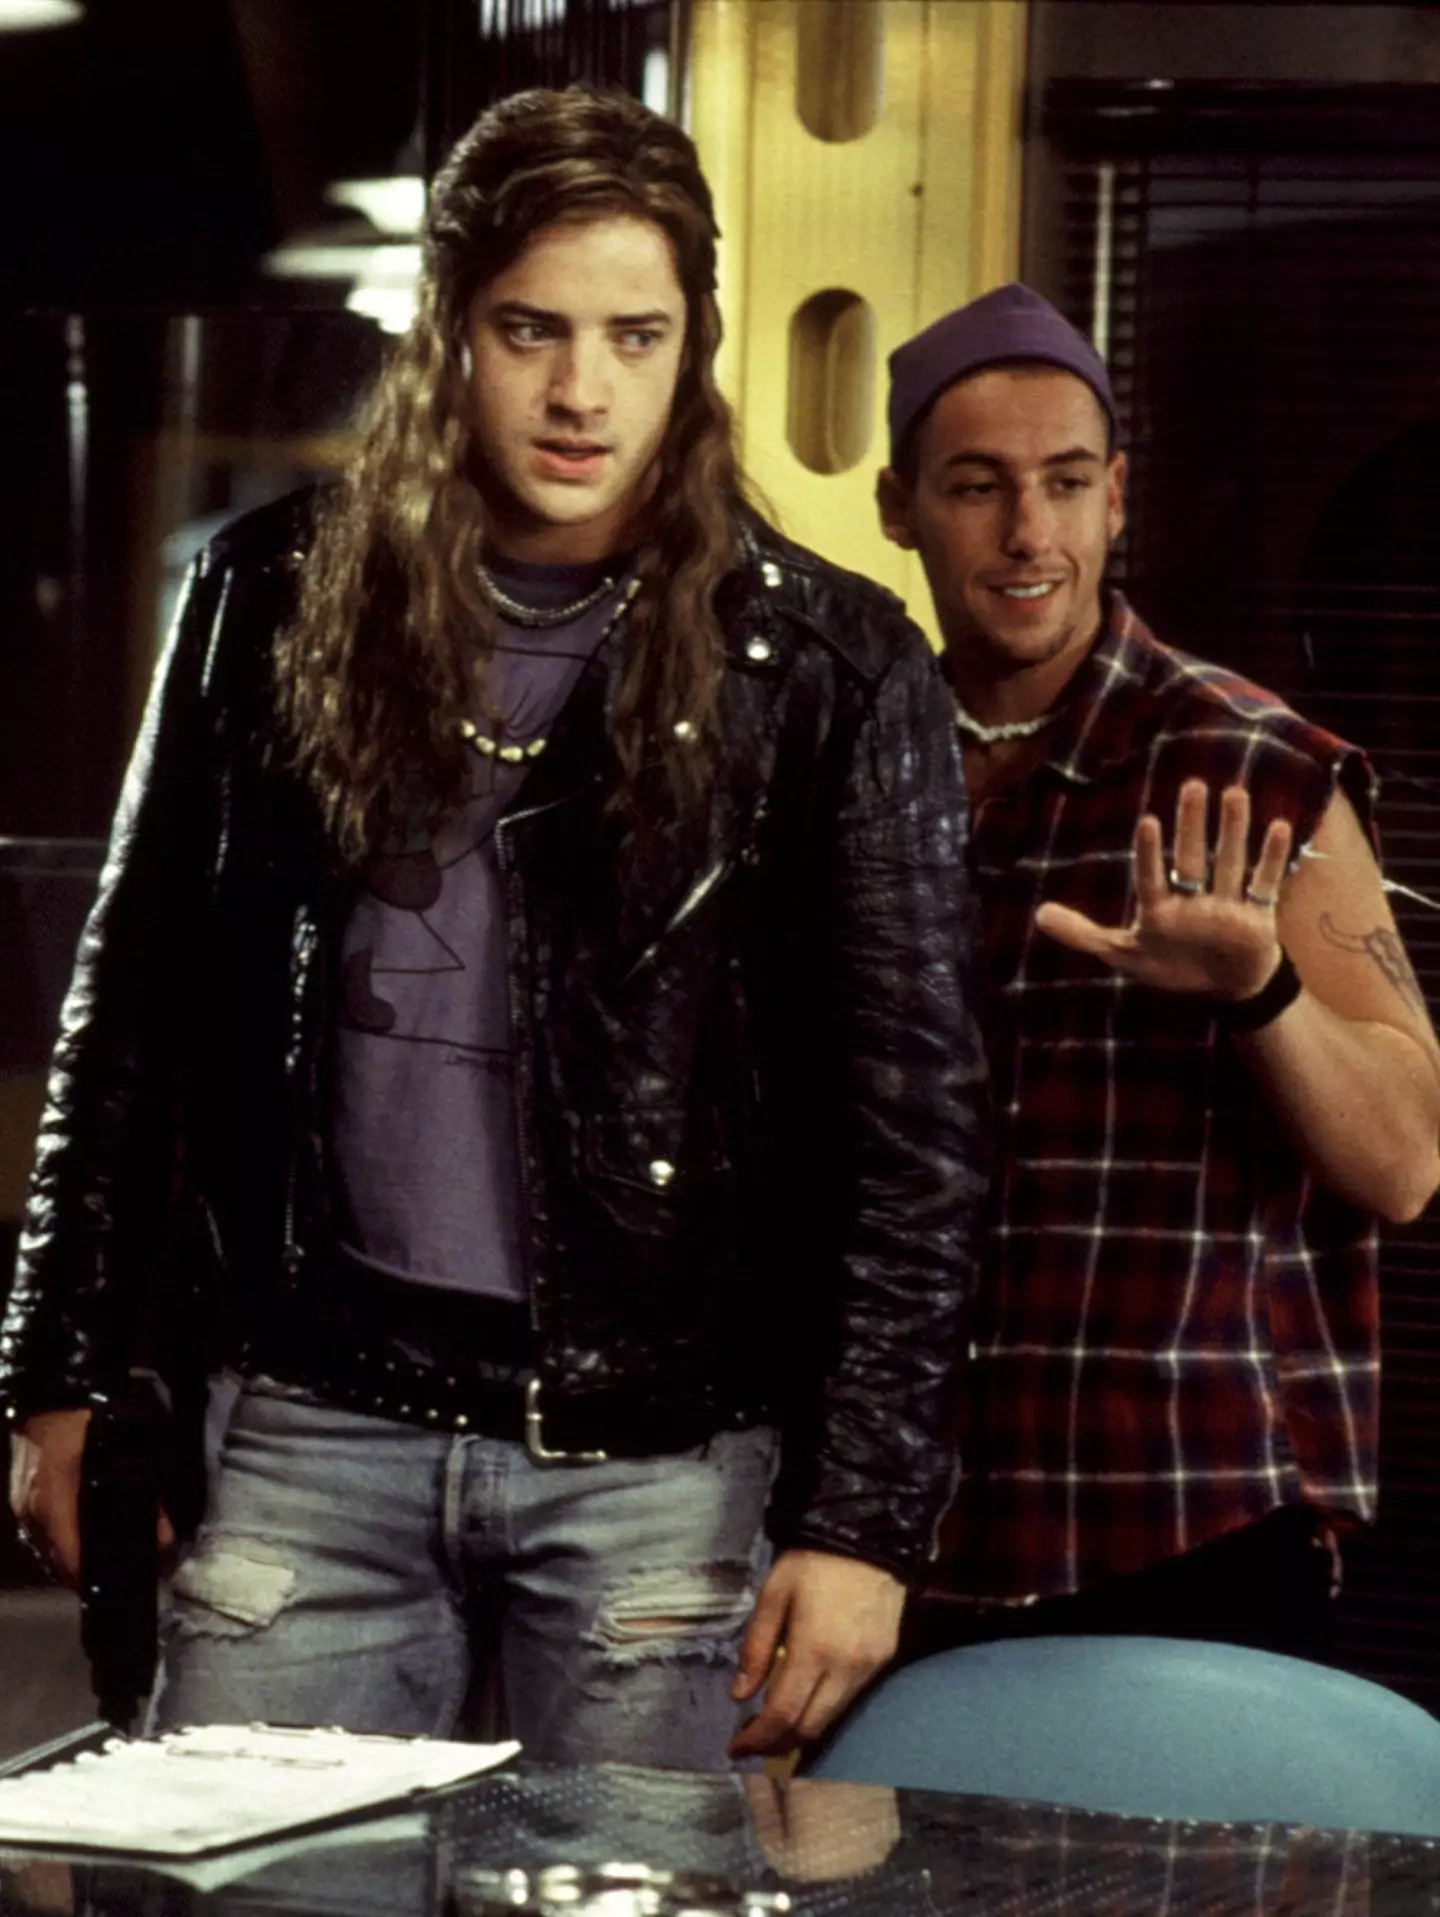 Adam Sandler and Brendan Fraser appeared in the 1994 film Airheads together.